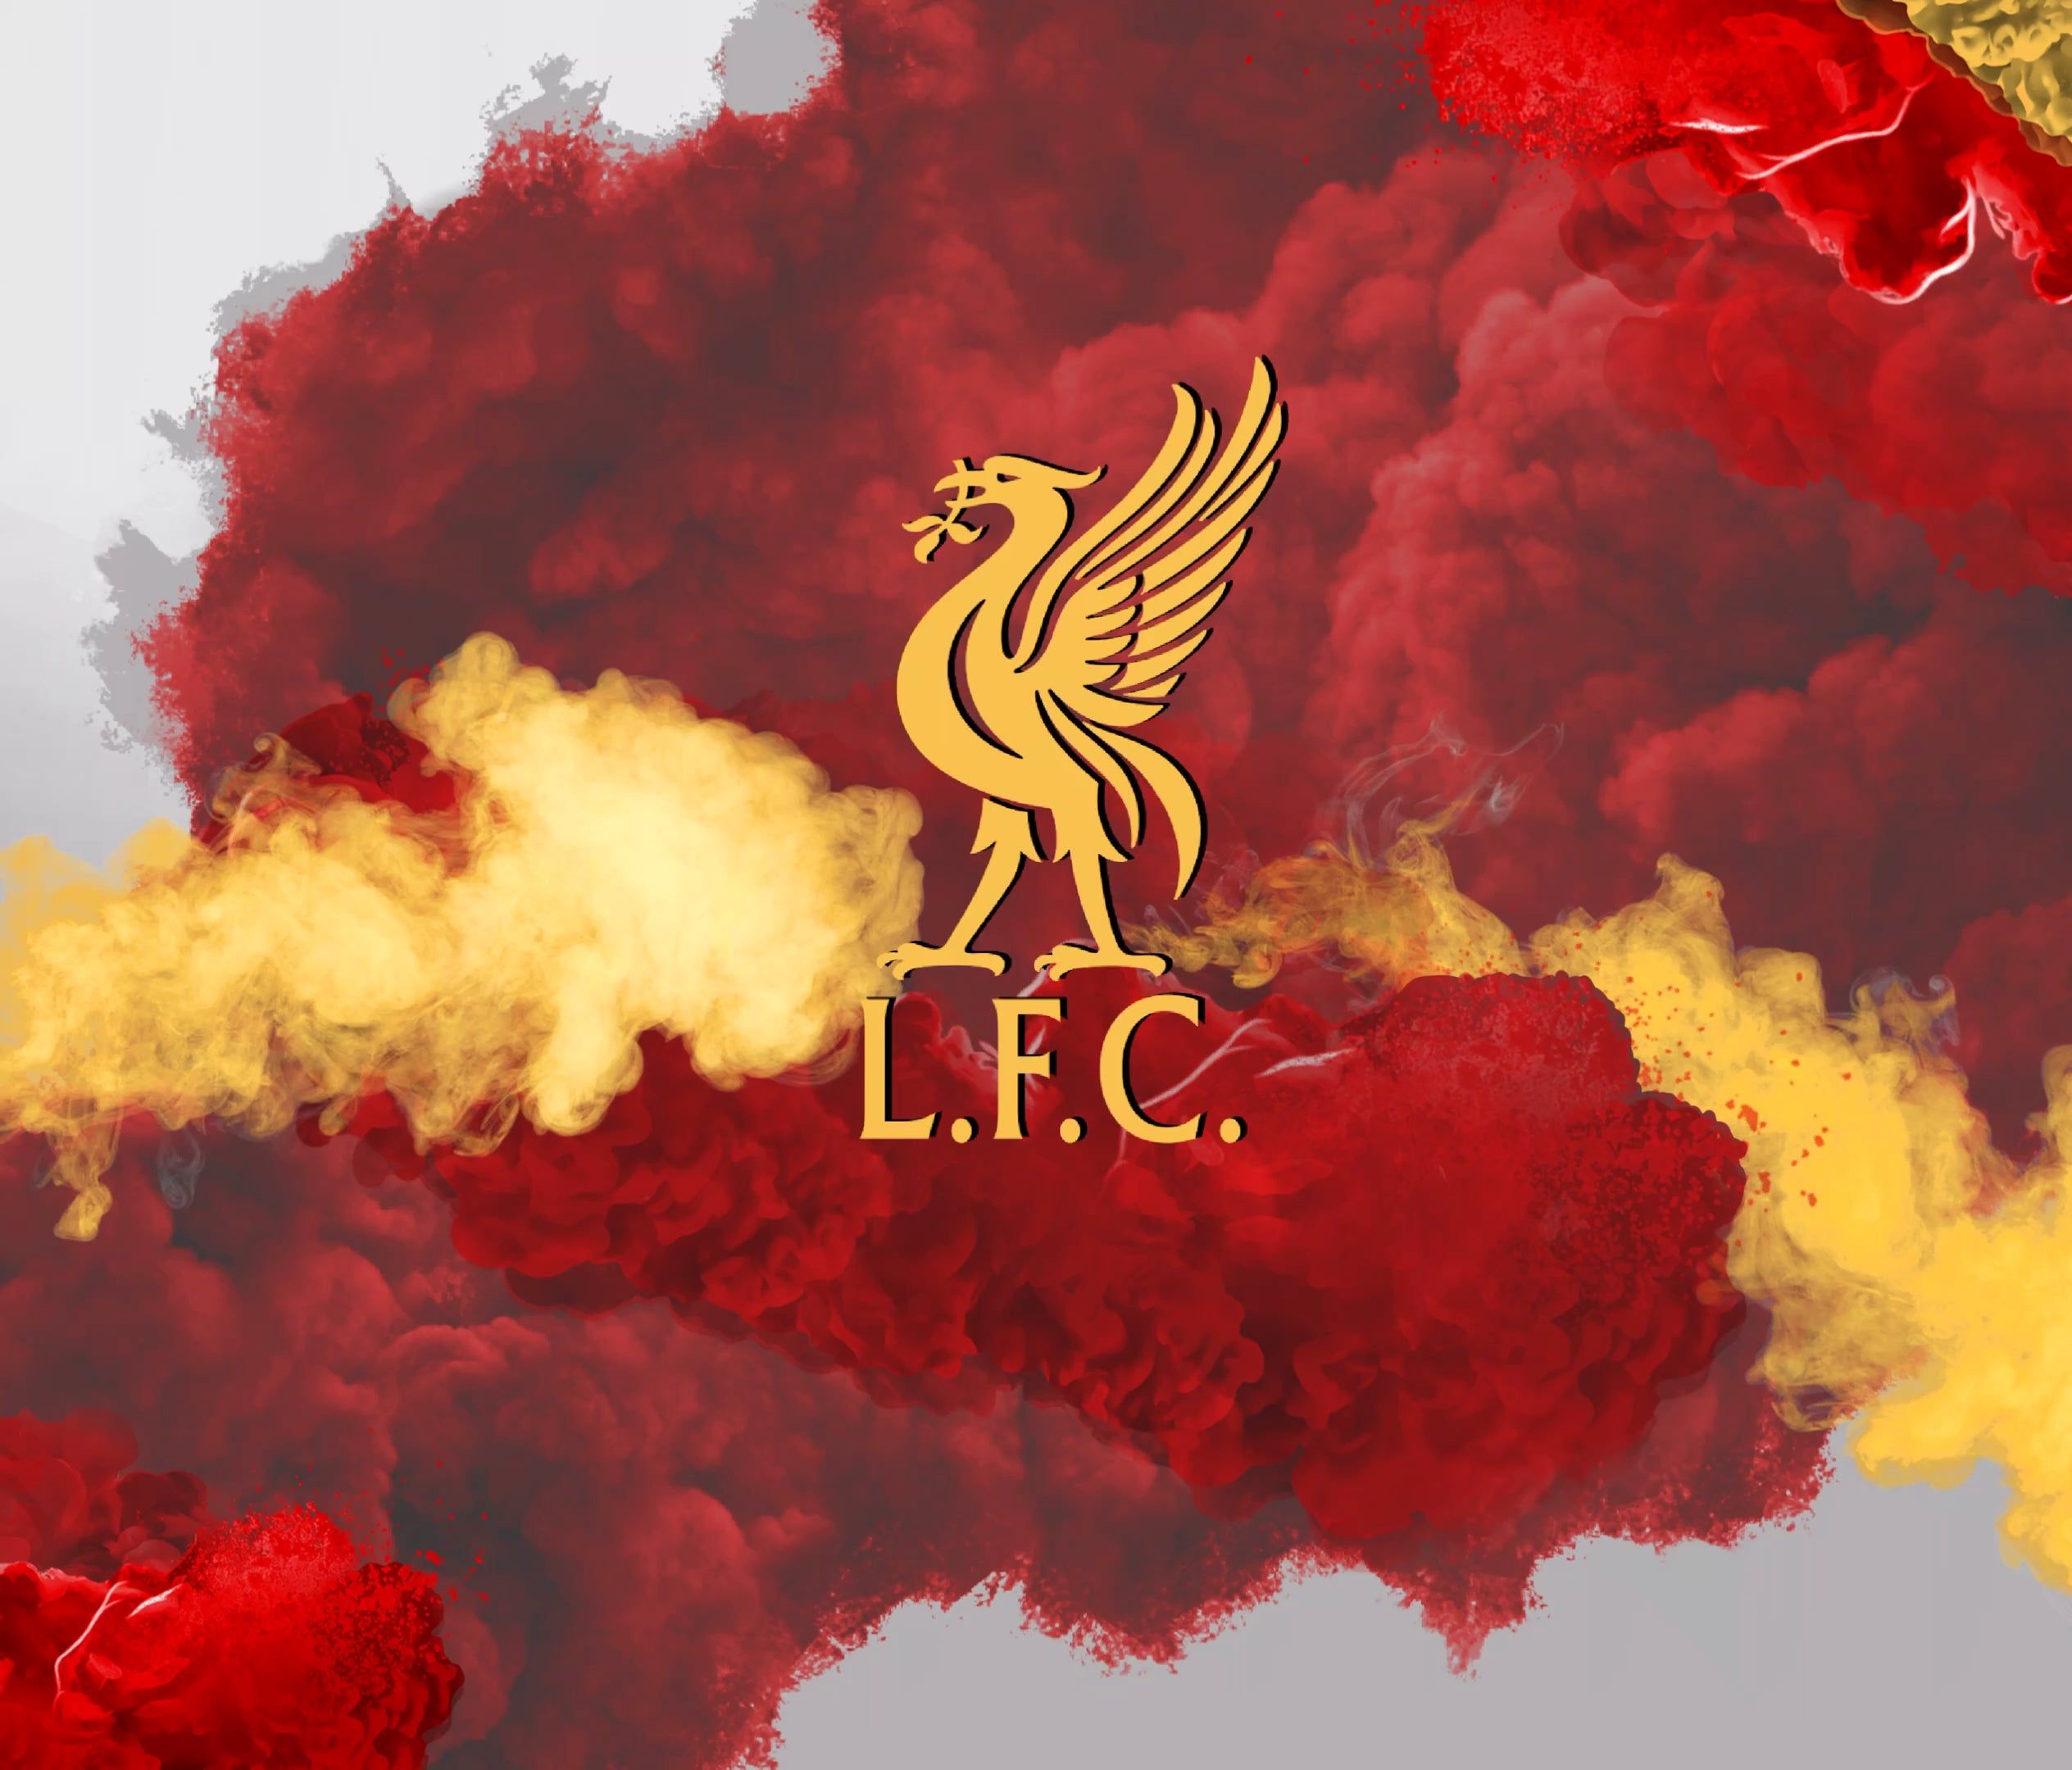 LFC Wallpaper [ OC updated] with Dropbox link to multiple variations as promised